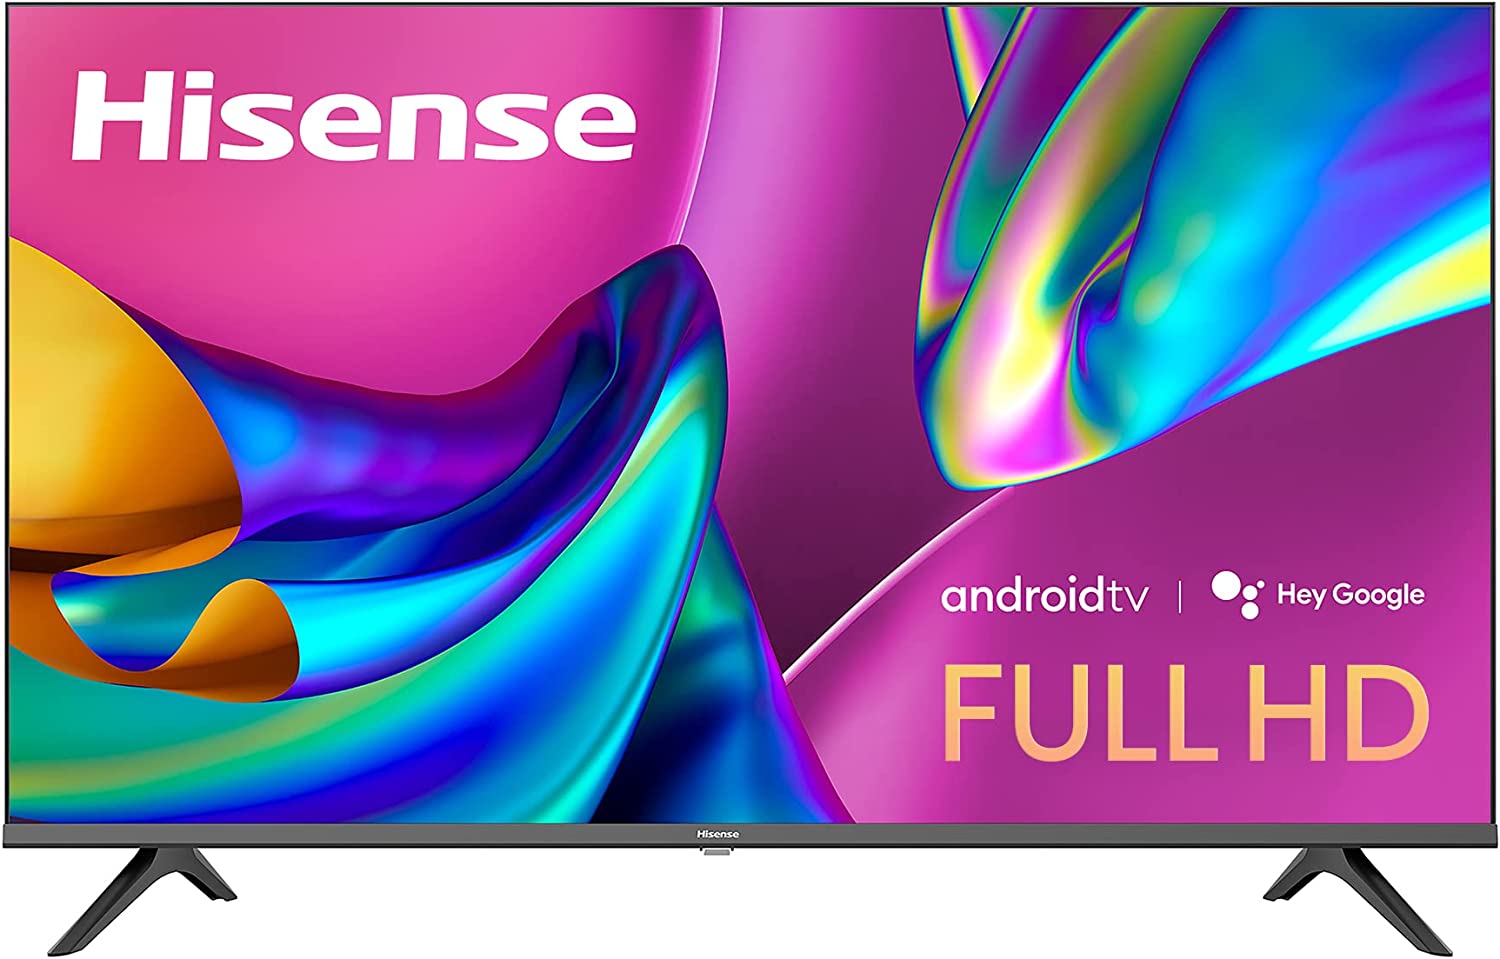 Hisense 32" LED LCD Android Smart TV A4FH Series - image 1 of 10